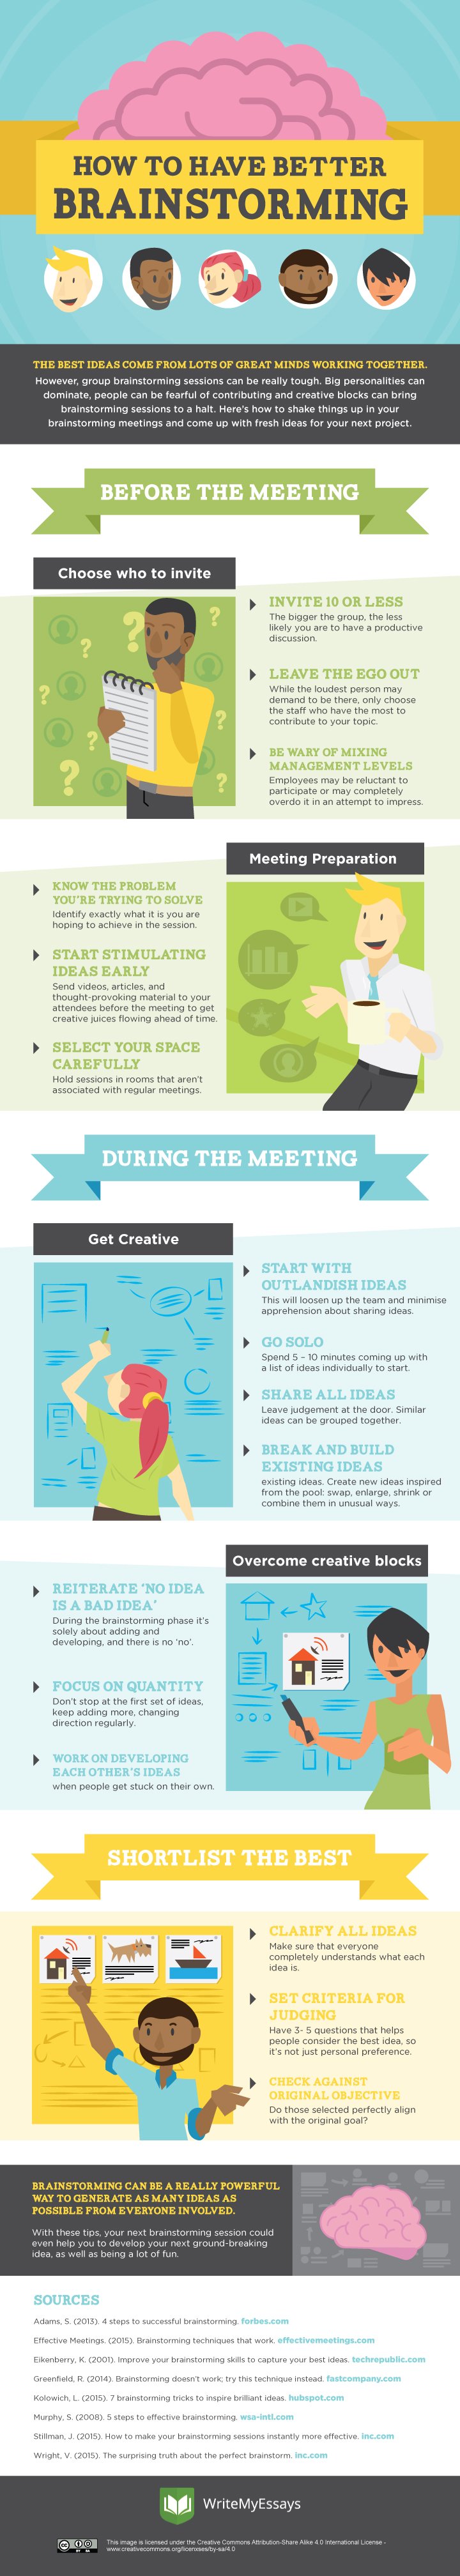 How to Have Better Brainstorming